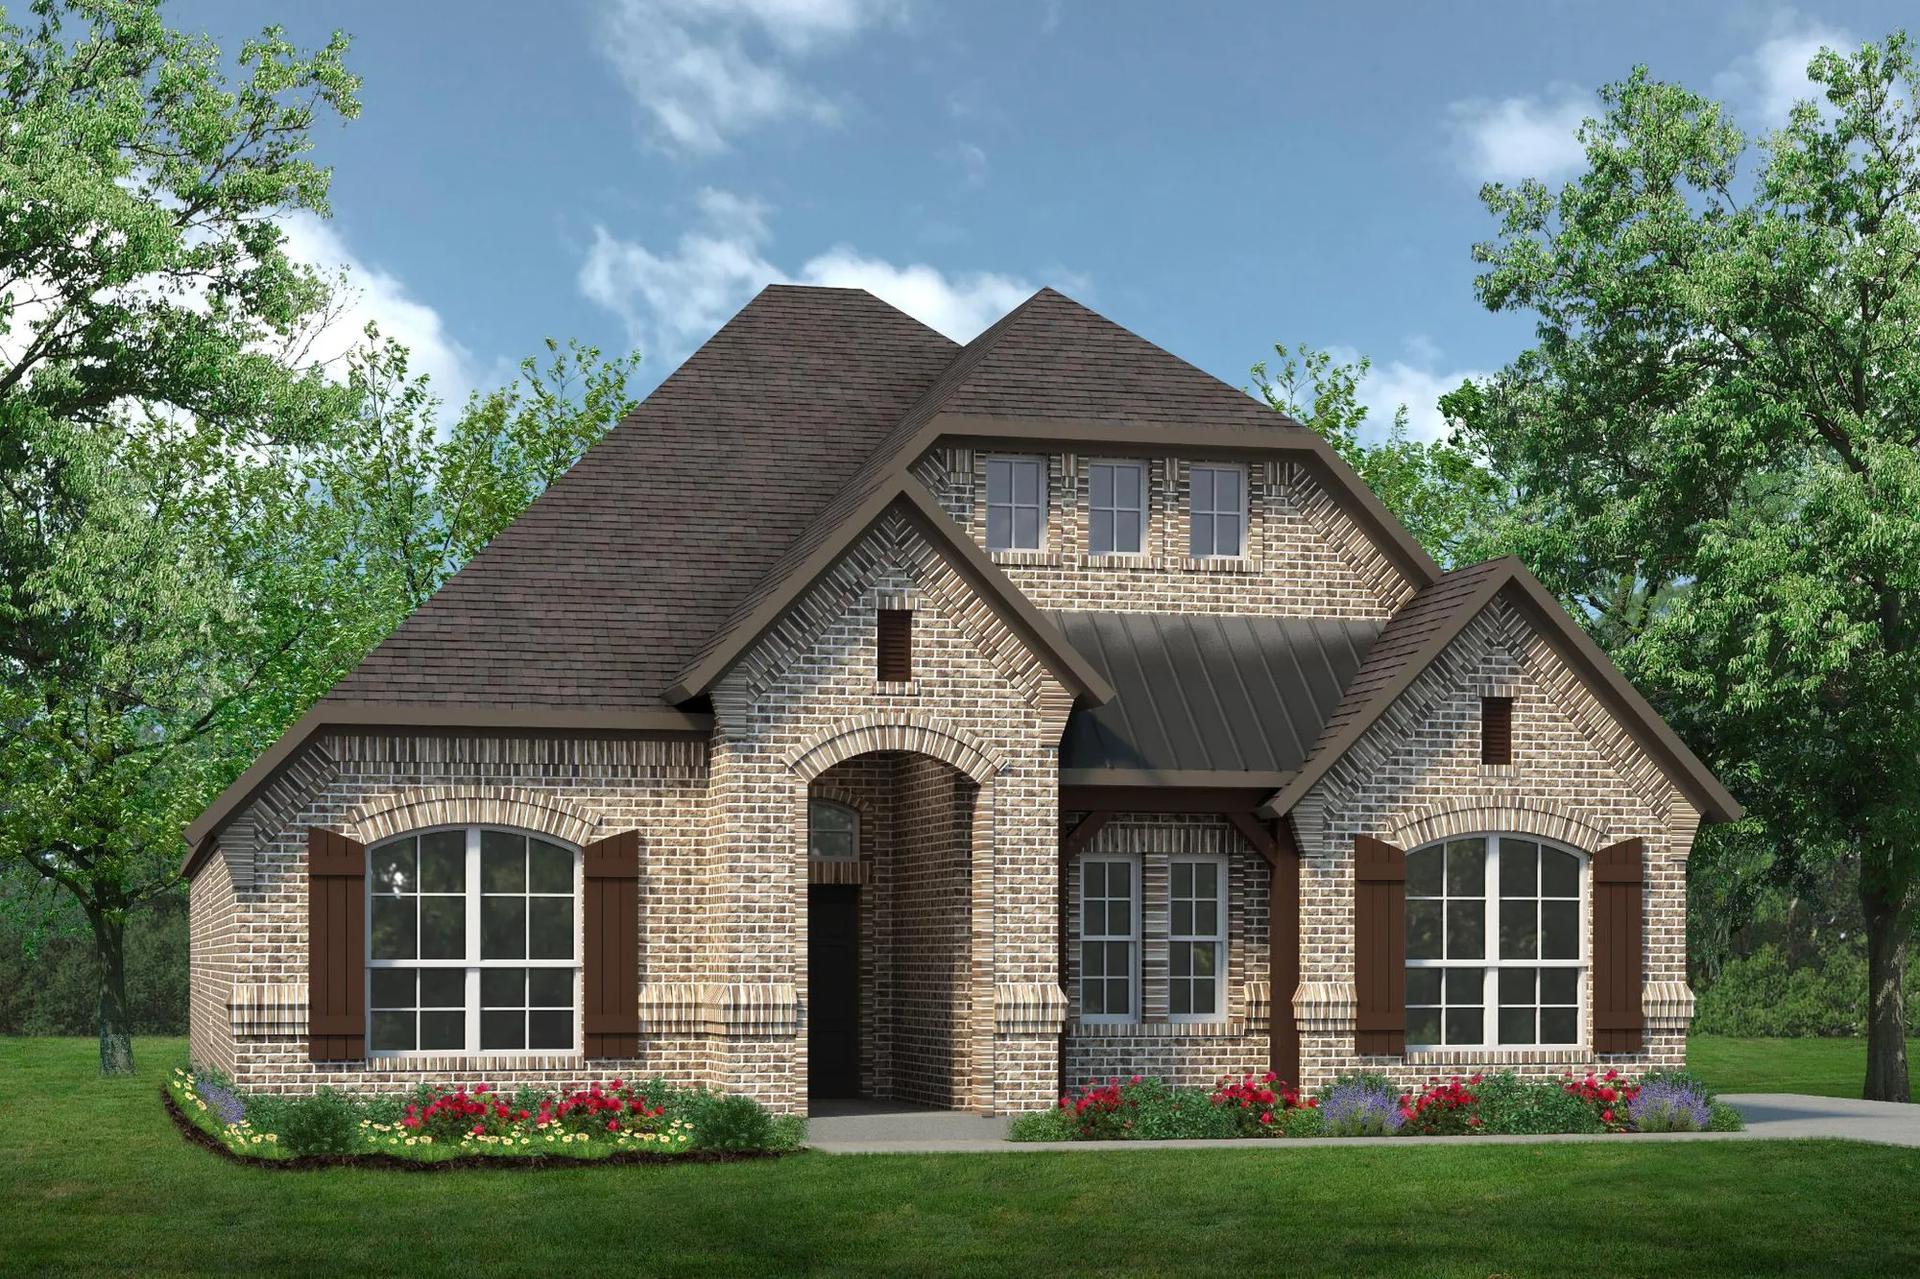 2373 C. Concept 2373 Home with 3 Bedrooms